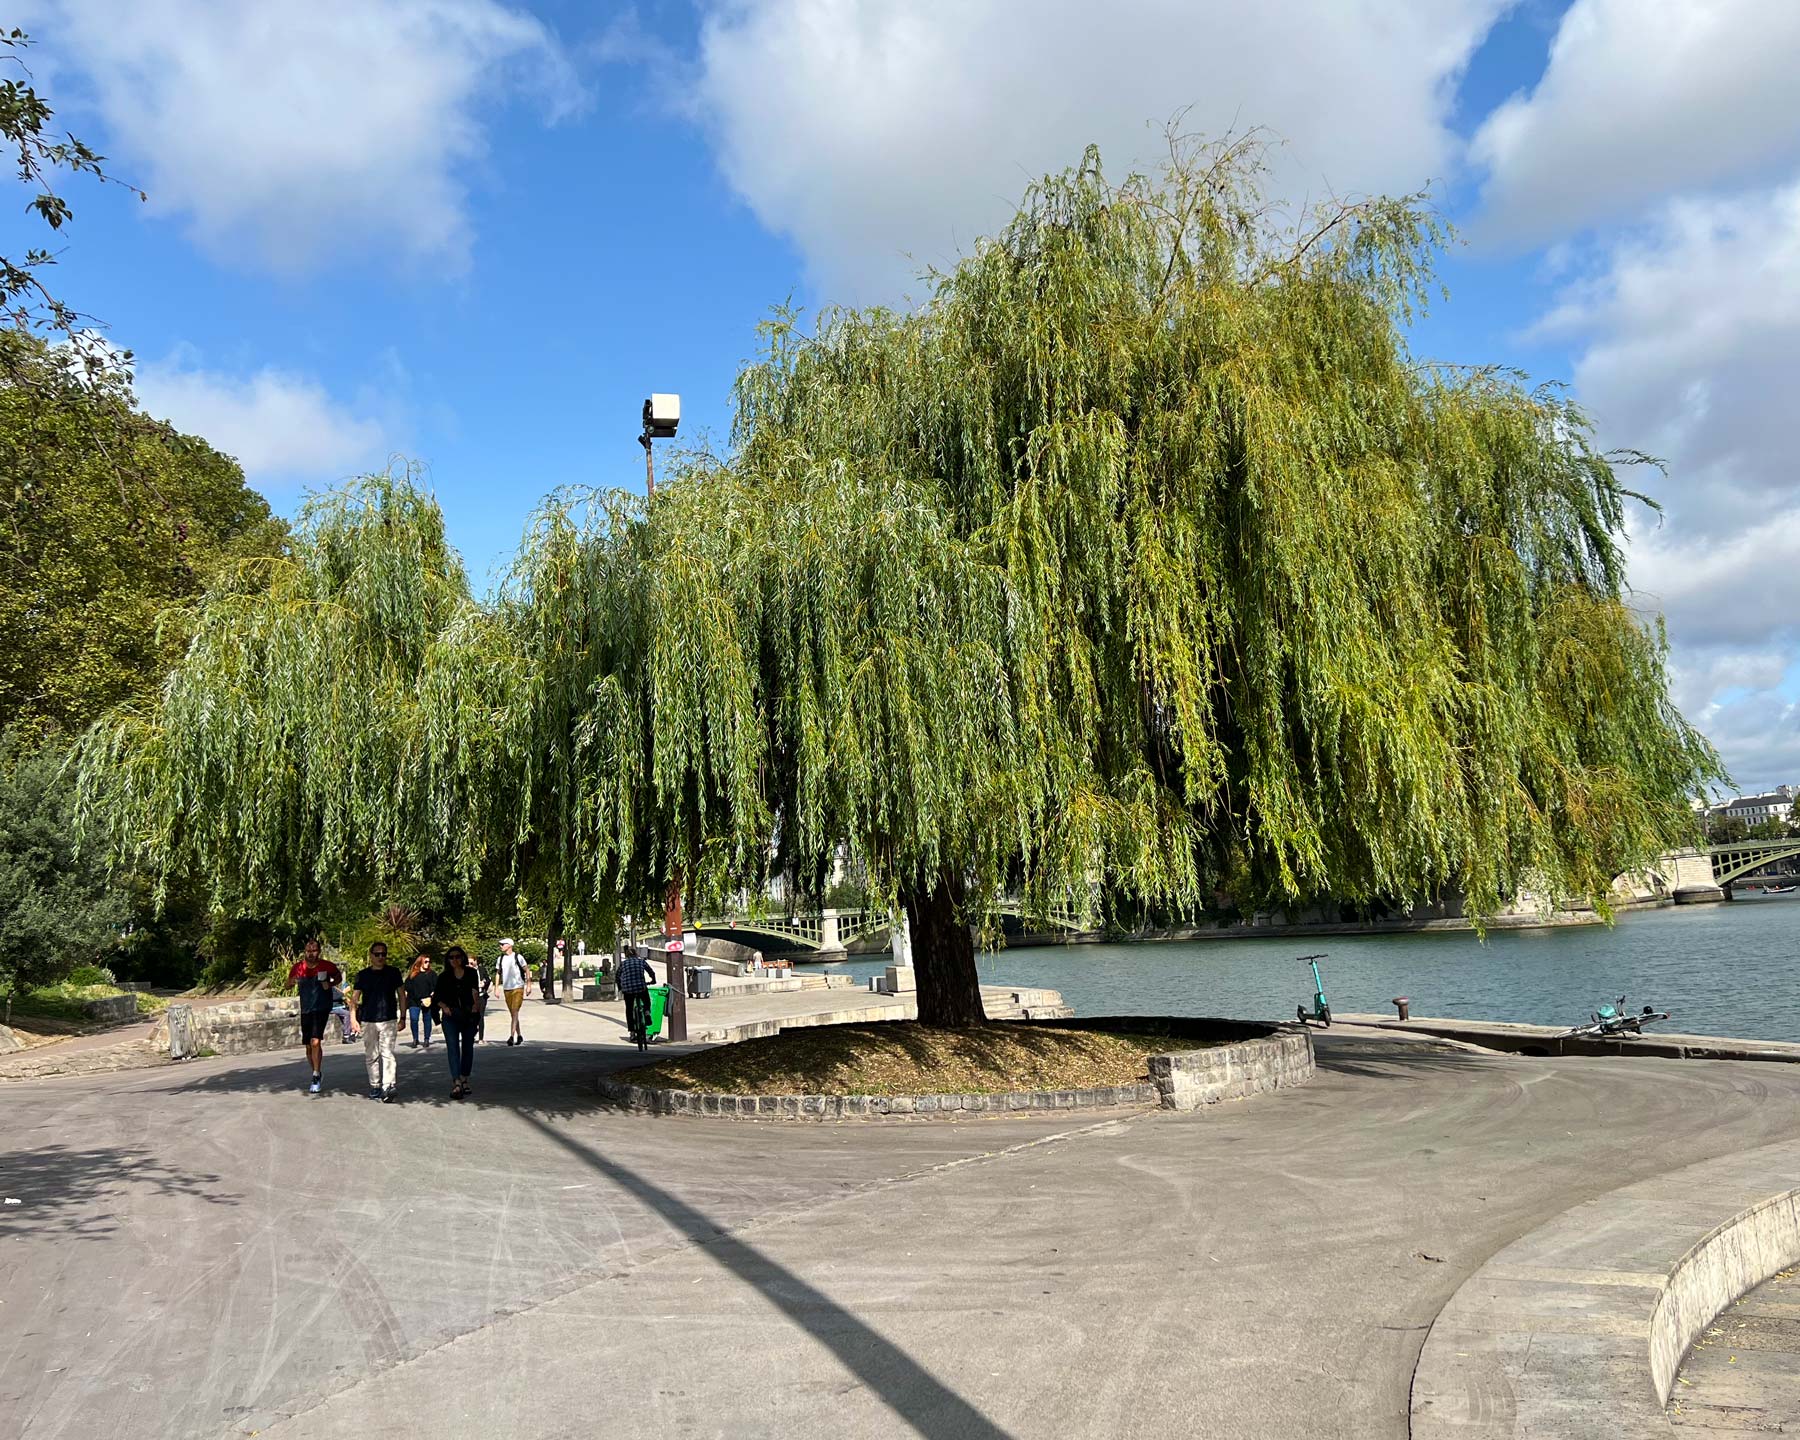 Salix babylonica - Weeping Willow on banks of River Seine in Paris